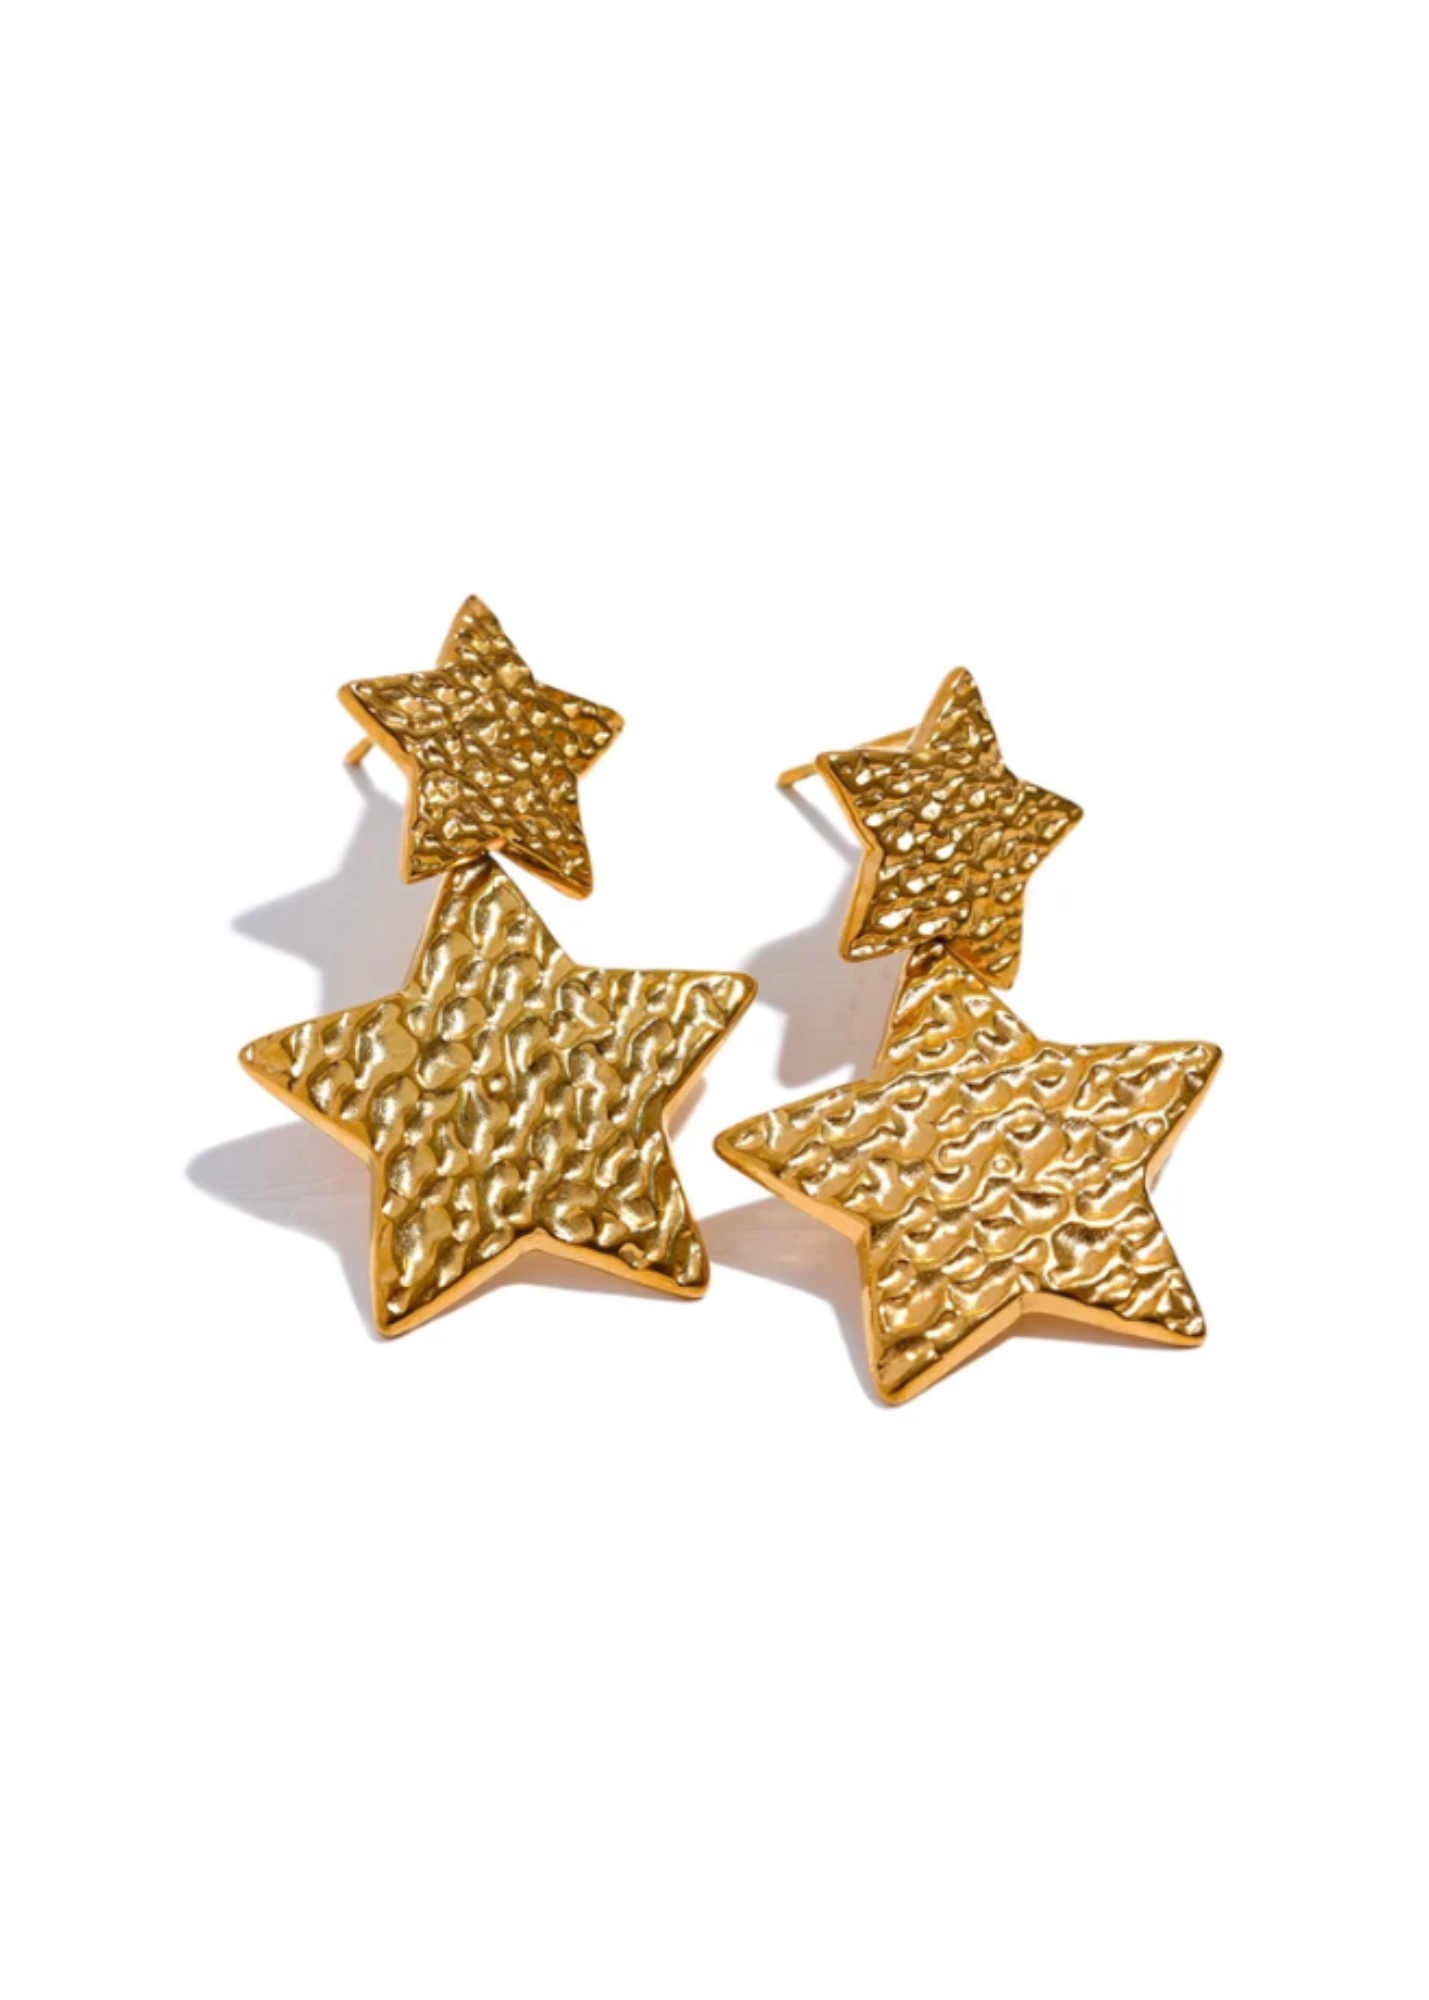 The Starry Night Gold Earrings